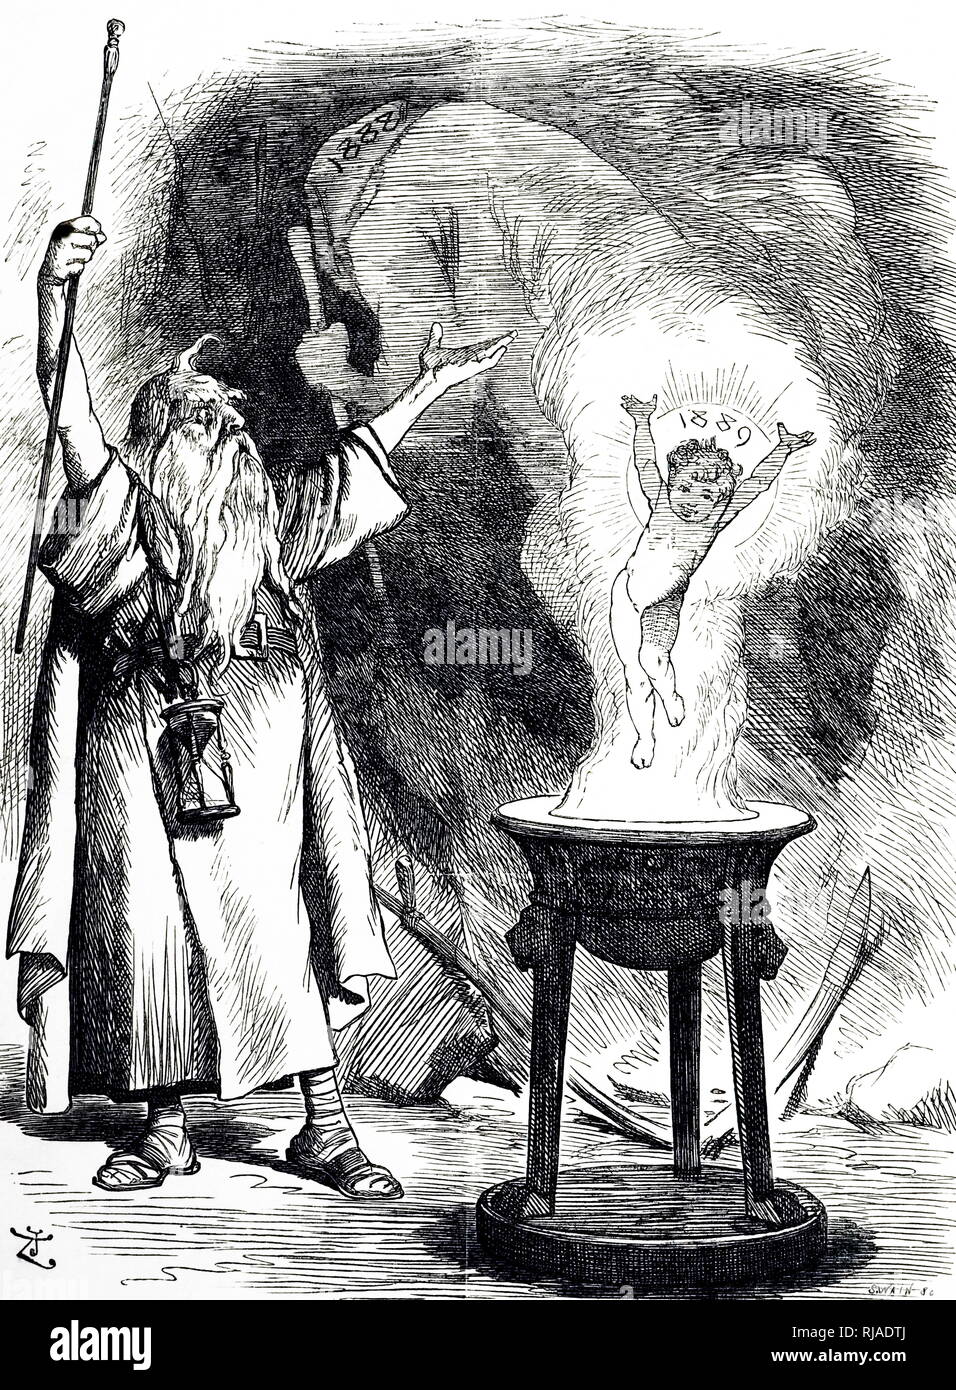 A cartoon depicting Father Time summoning up the new year for 1889, while the figure of old 1888 creeps away in the background. Dated 19th century Stock Photo